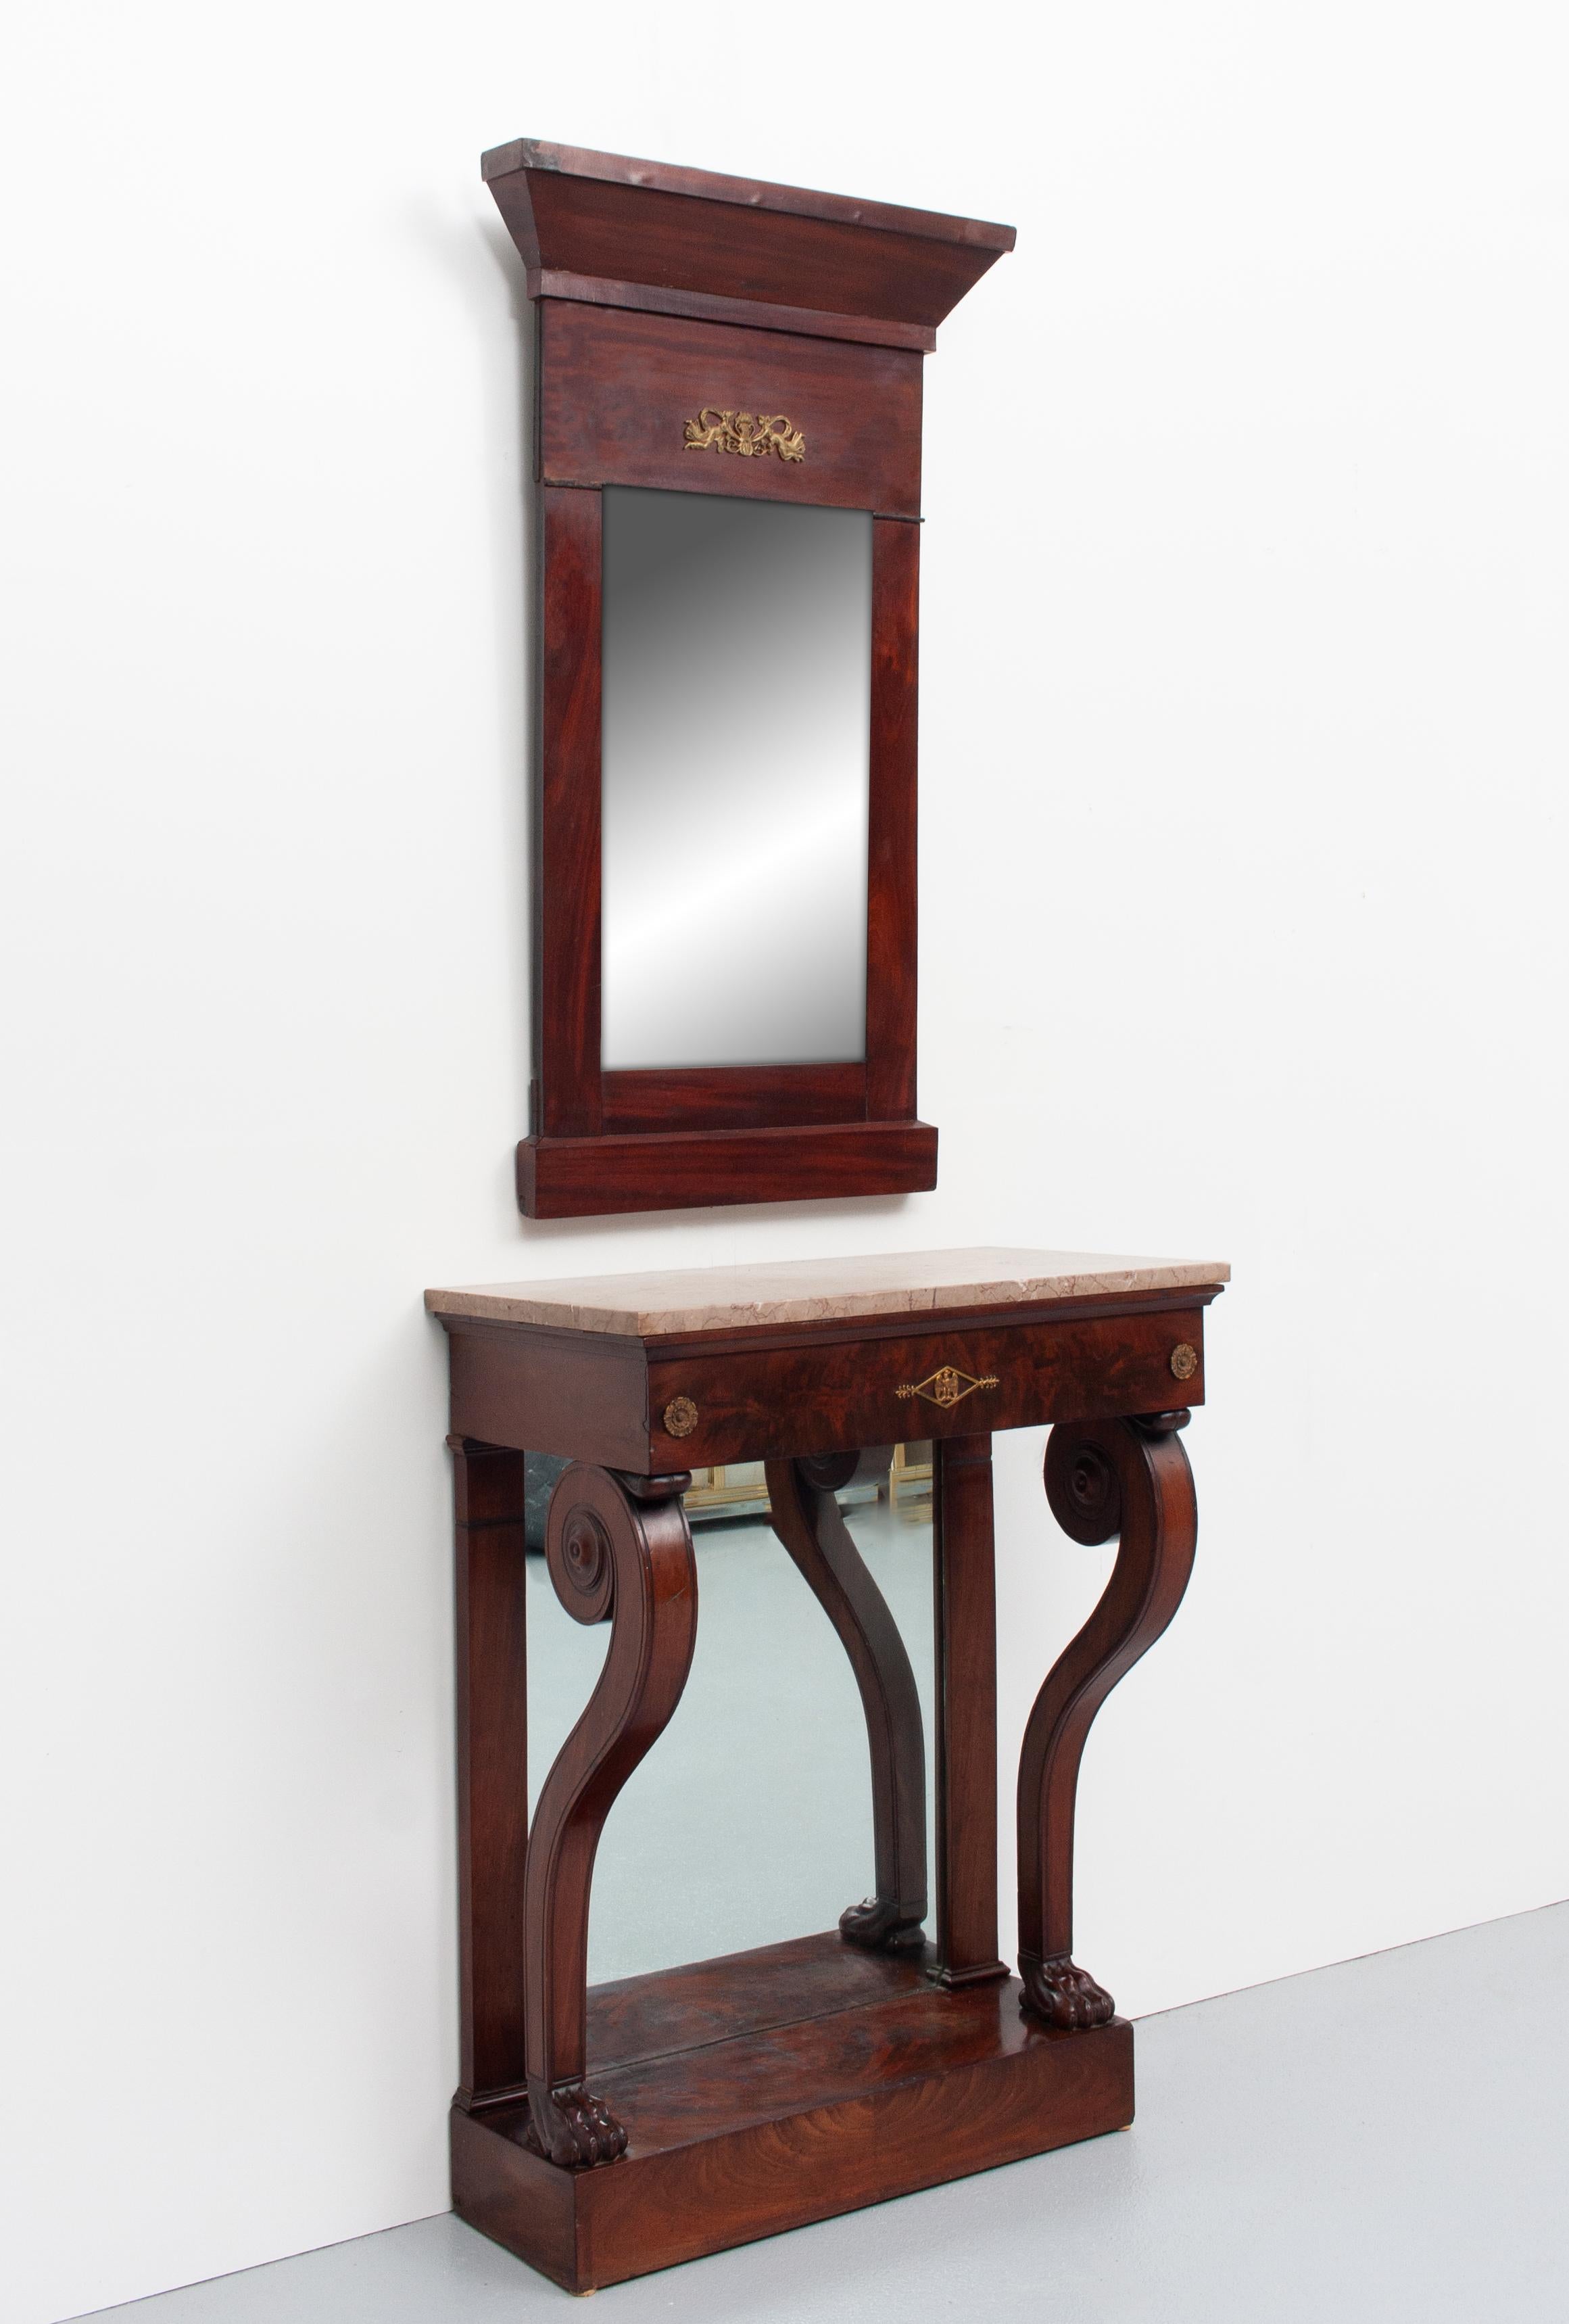 French Empire Style Trumeau Mirror with Matching Console Table